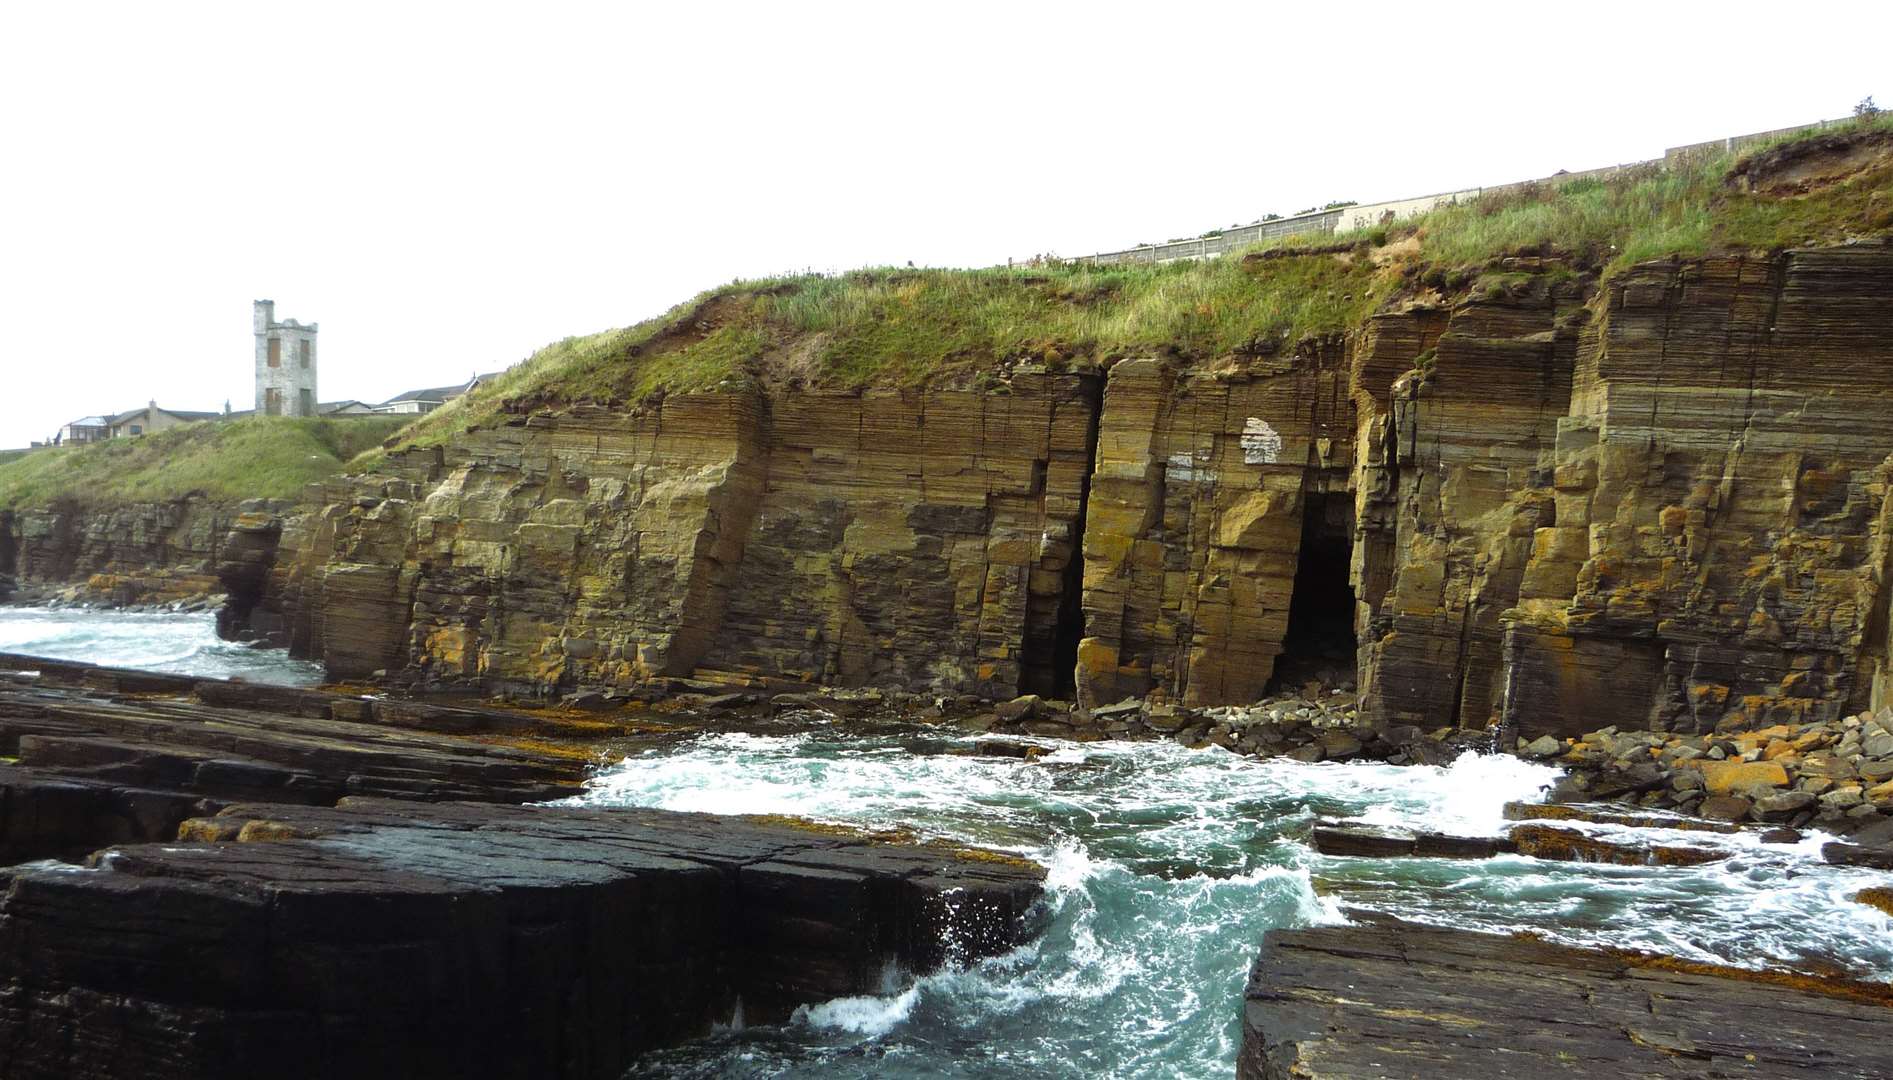 Caves on the north side of Wick Bay that Travelling families lived in after the Vagrancy Act of 1824 made it hard to live a nomadic lifestyle. Picture: DGS